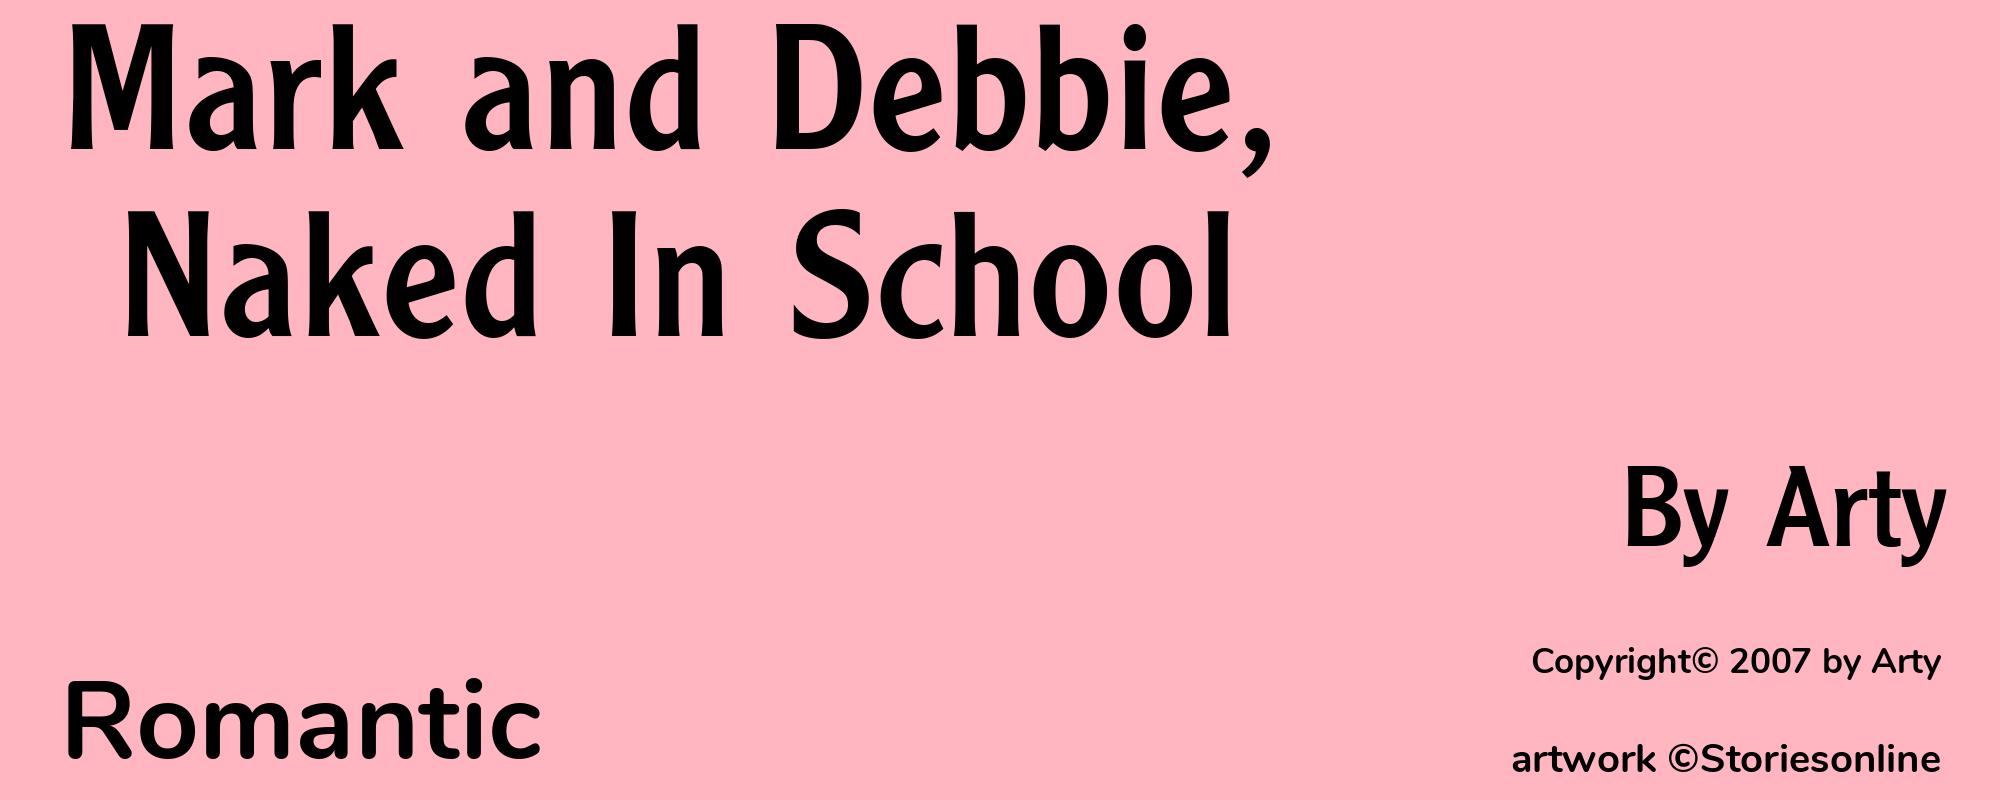 Mark and Debbie, Naked In School - Cover